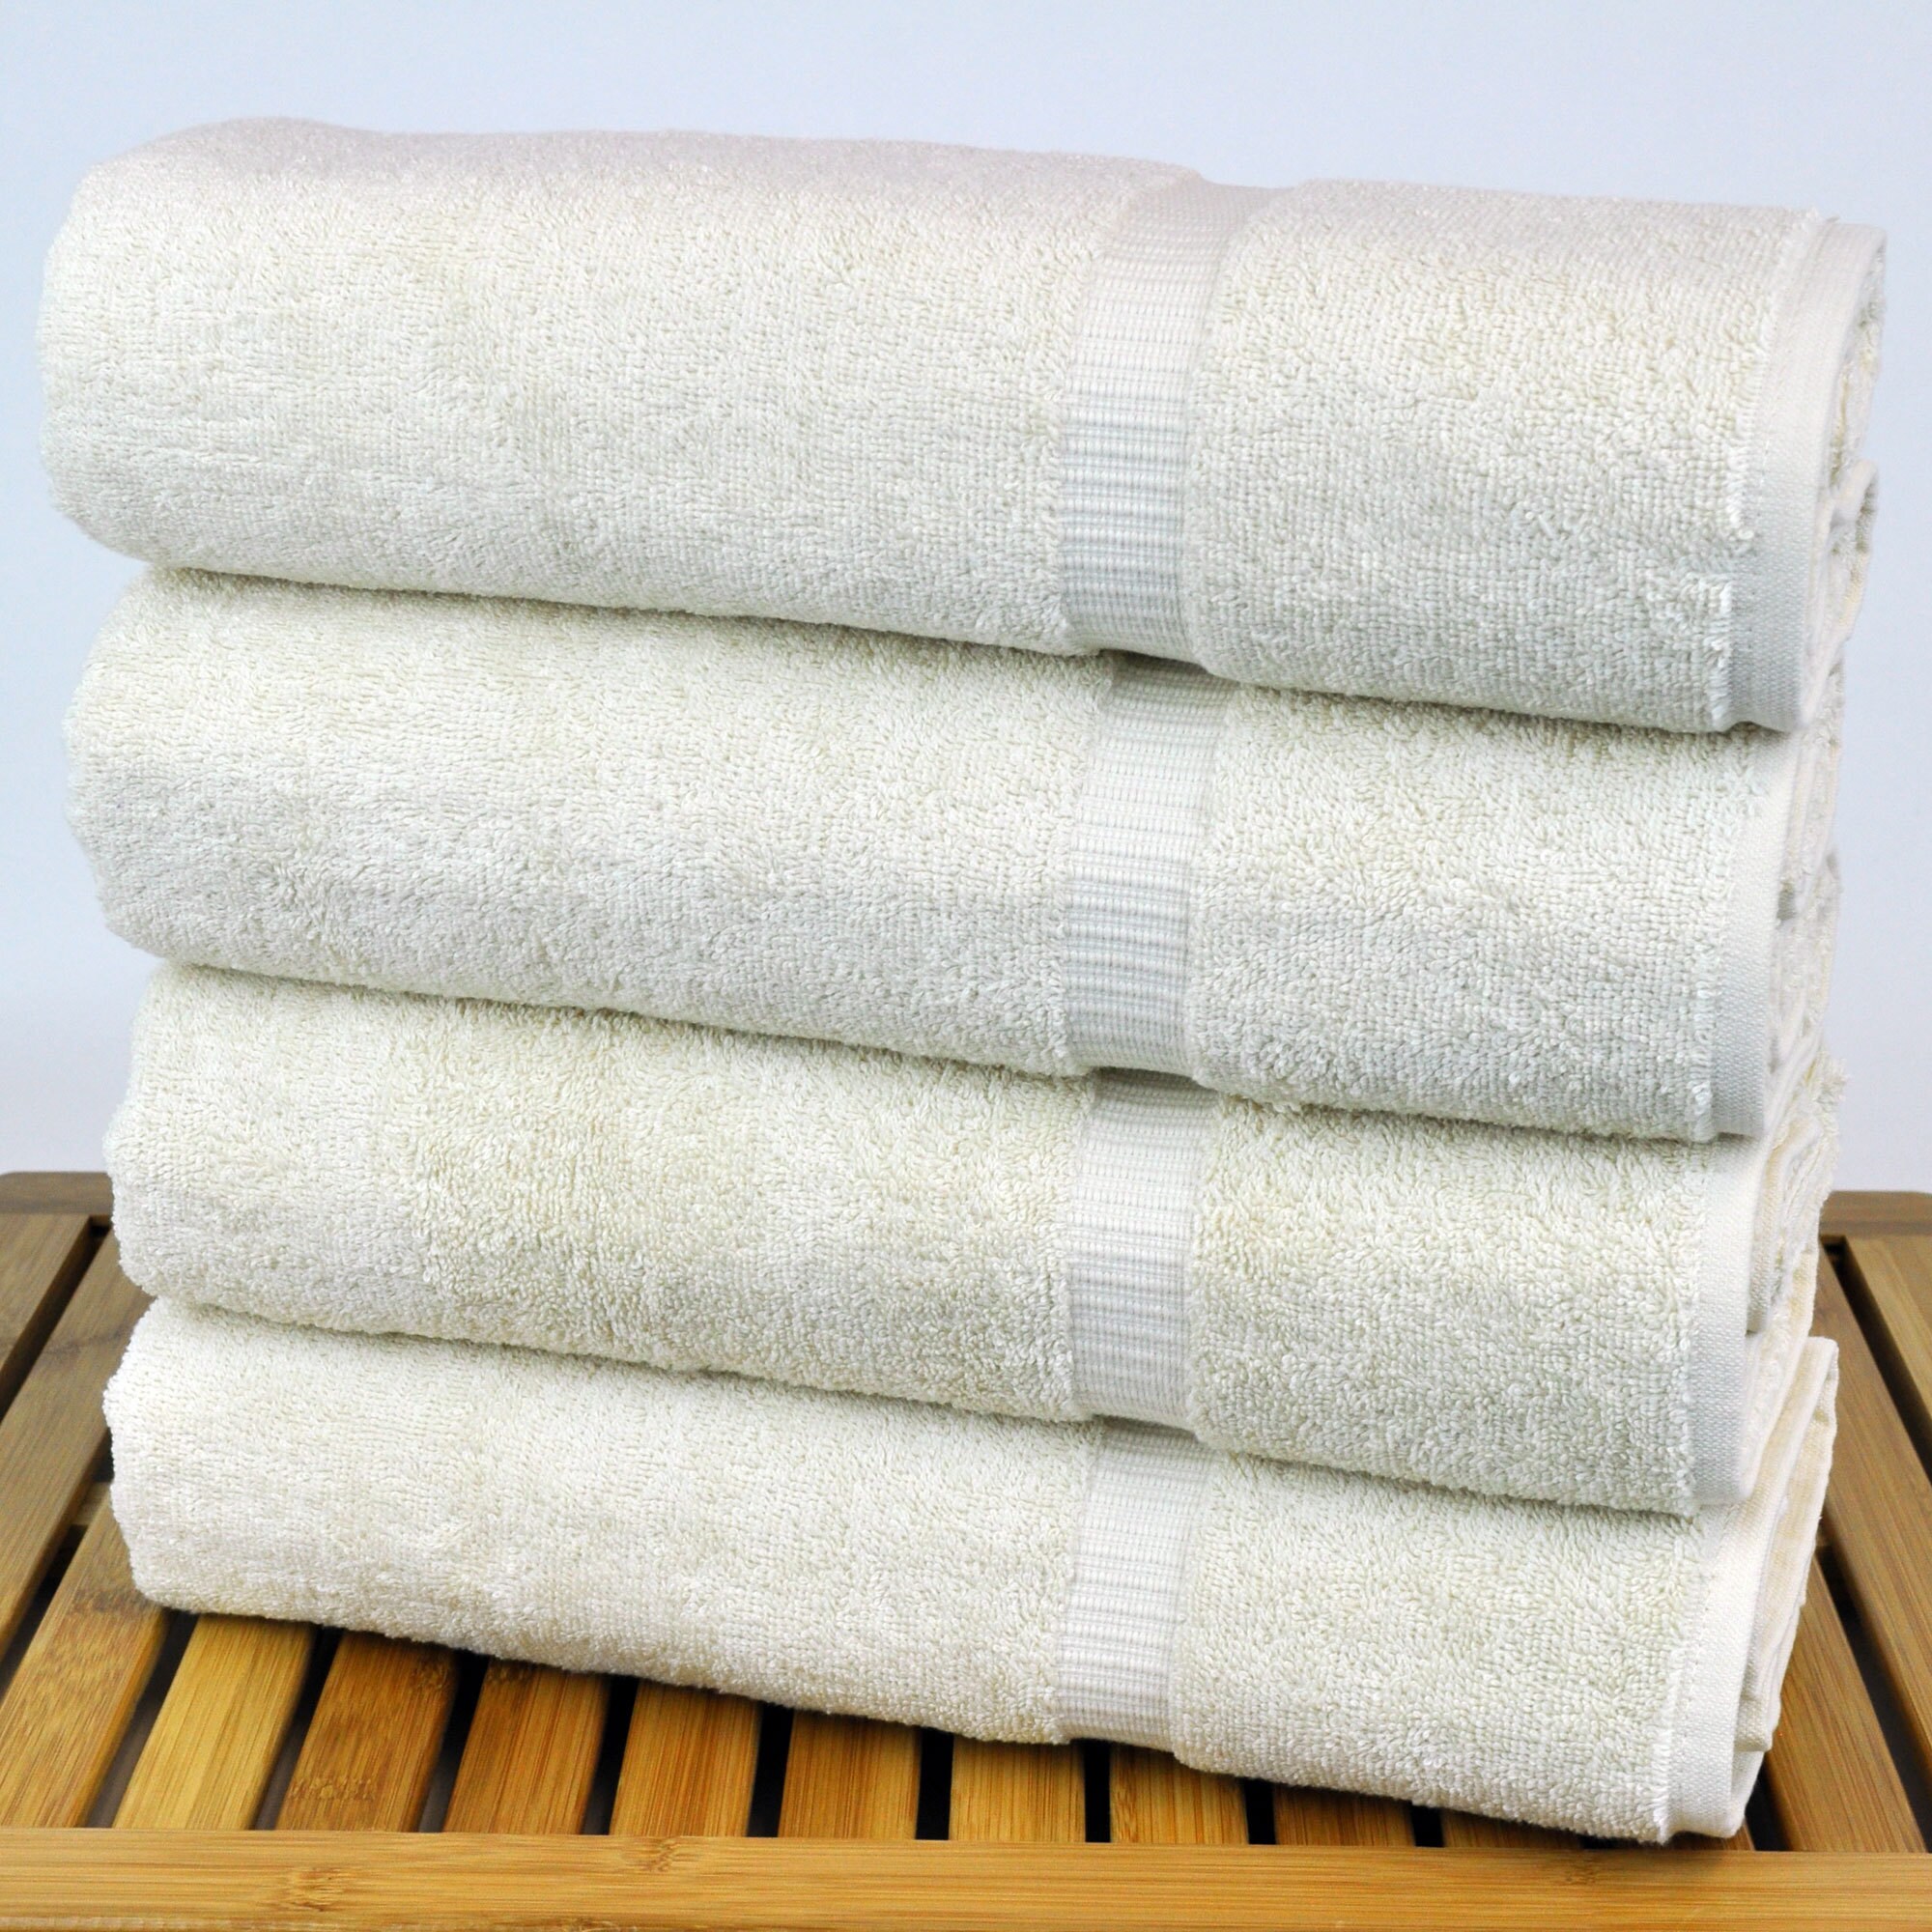 https://ak1.ostkcdn.com/images/products/10102600/Luxury-Hotel-and-Spa-100-percent-Turkish-Cotton-Bath-Towels-Set-of-4-dbff84e4-1842-40e9-a827-7ee1855bb9be.jpg